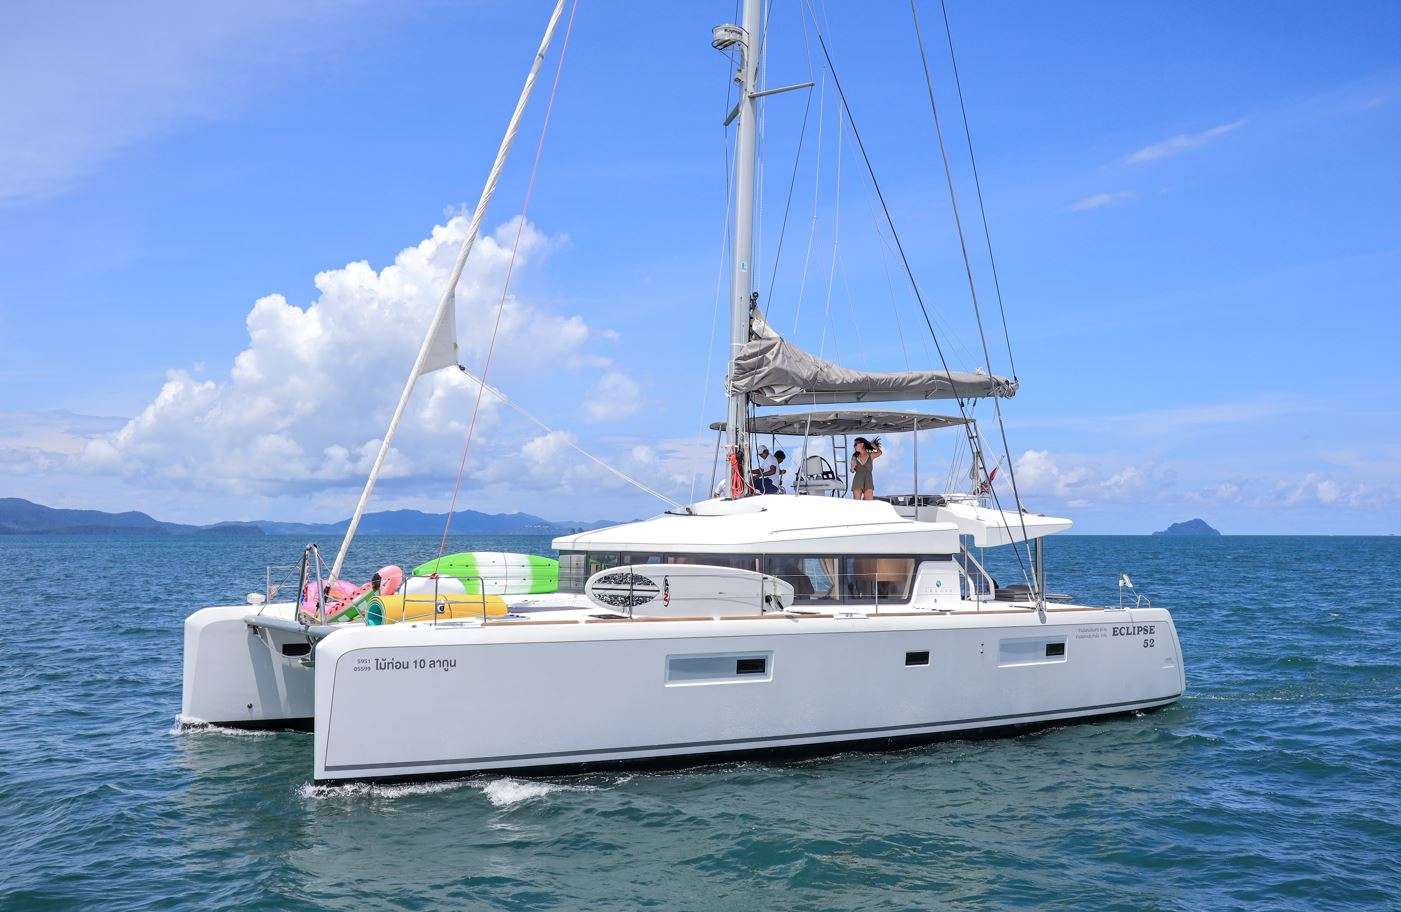 Eclipse - Luxury yacht charter Thailand & Boat hire in Indian Ocean & SE Asia 1